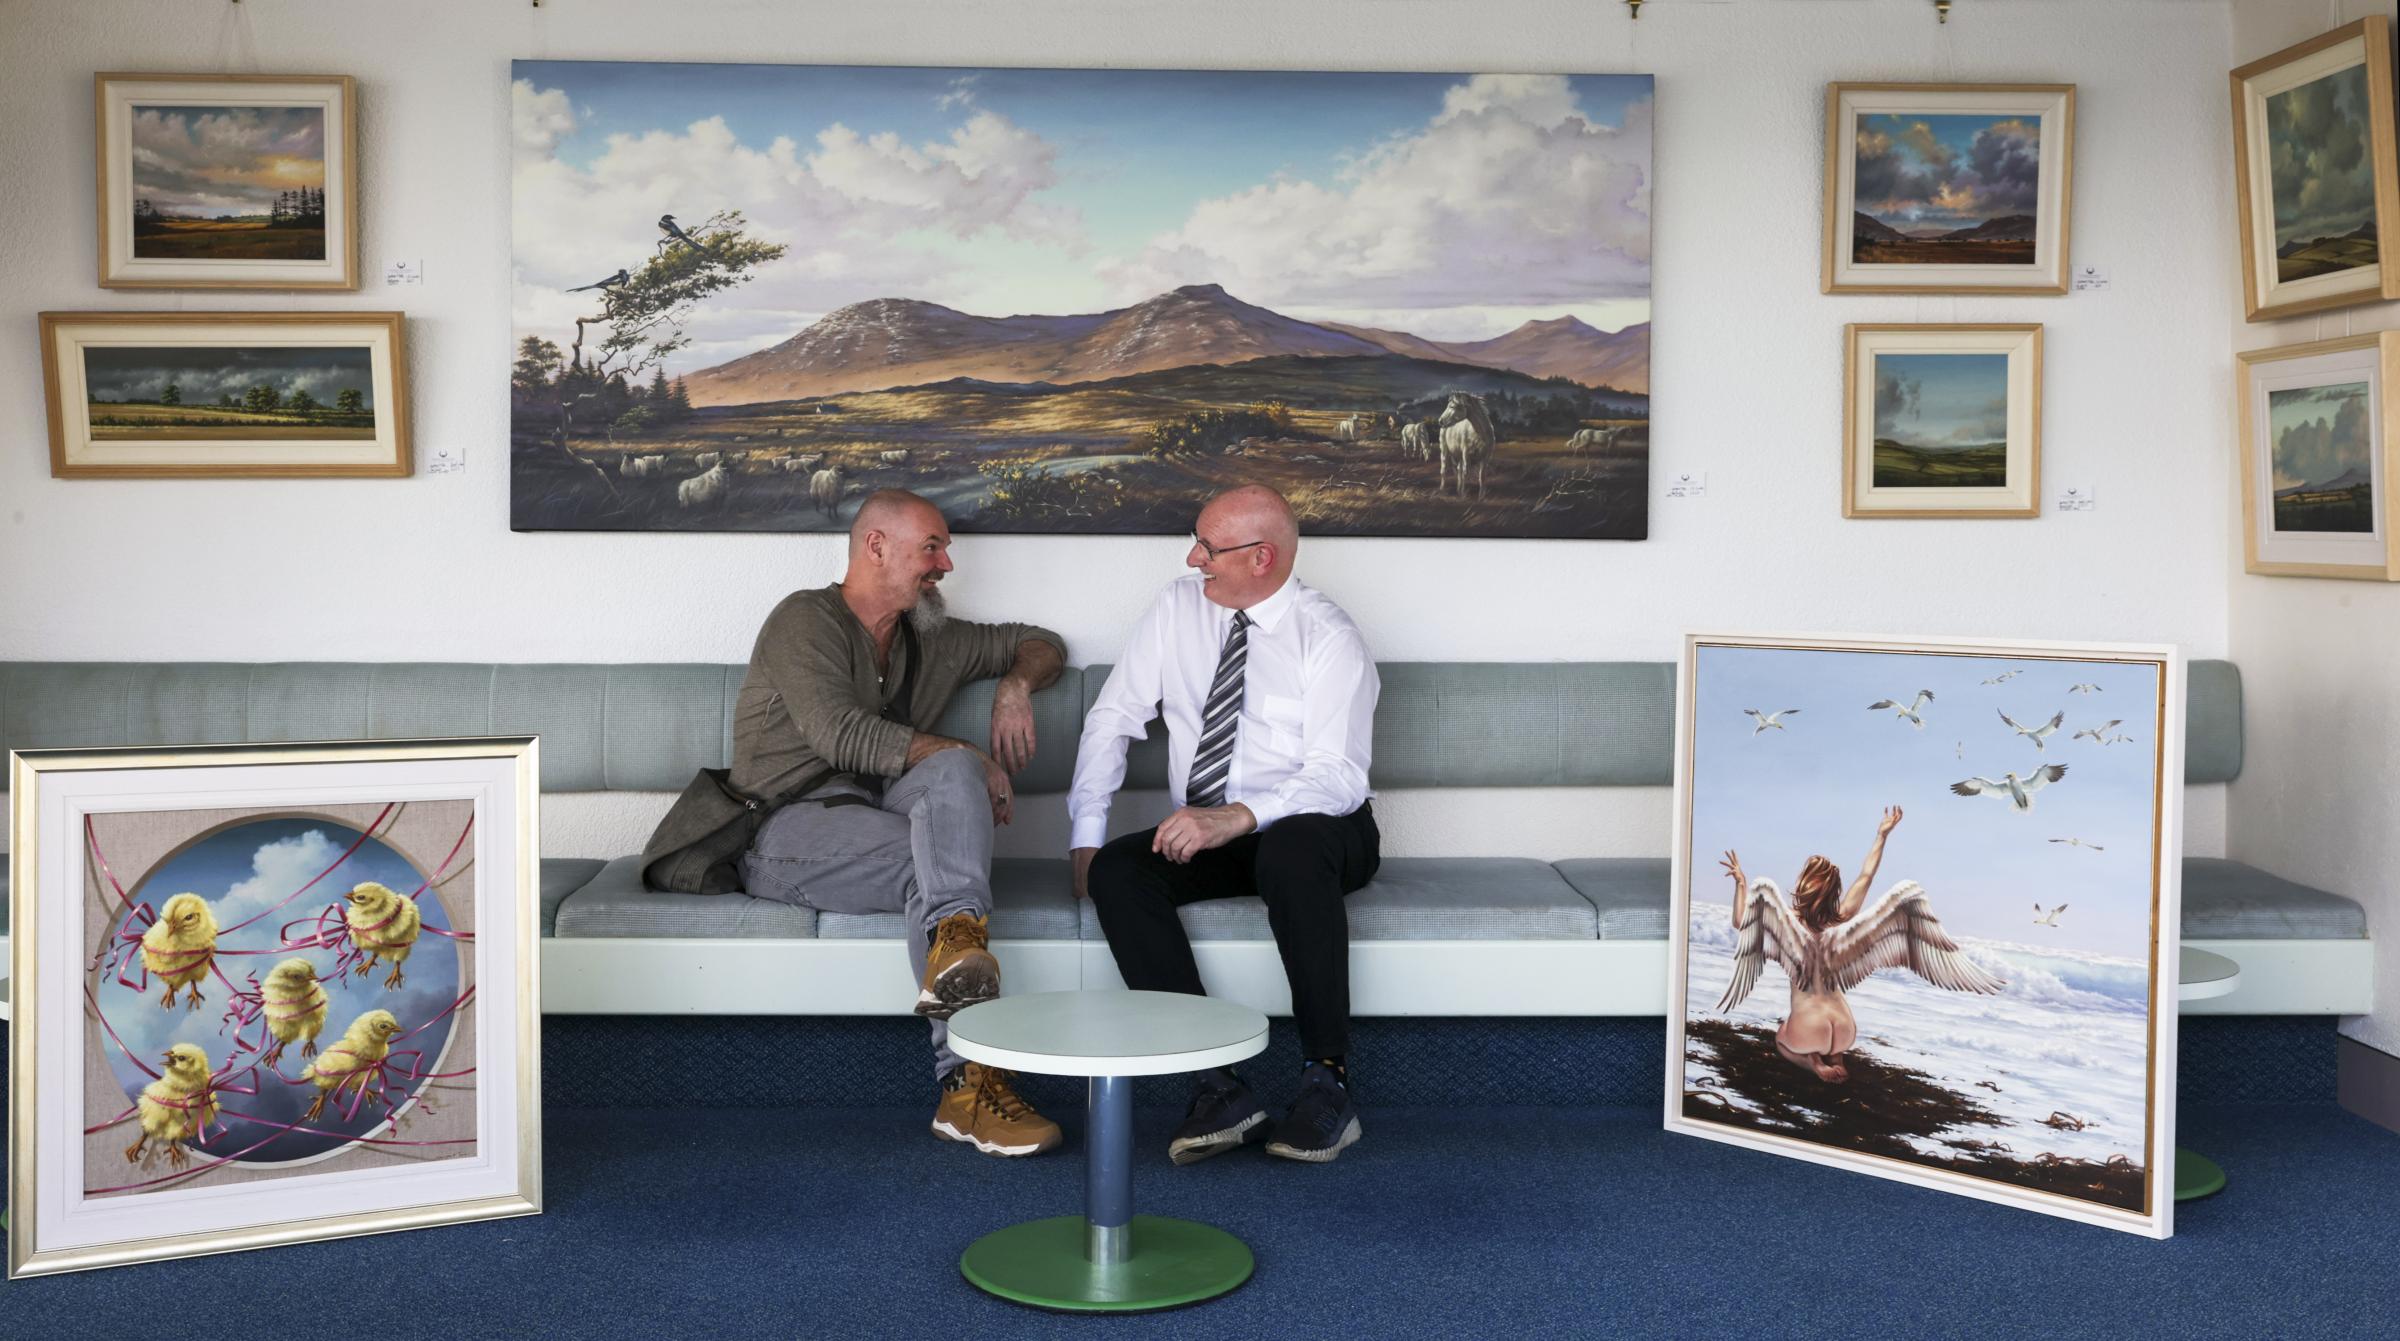 Laurence OToole, Artist, chatting with Charlie Oldcroft during his exhibition at The Ardhowen Theatre.